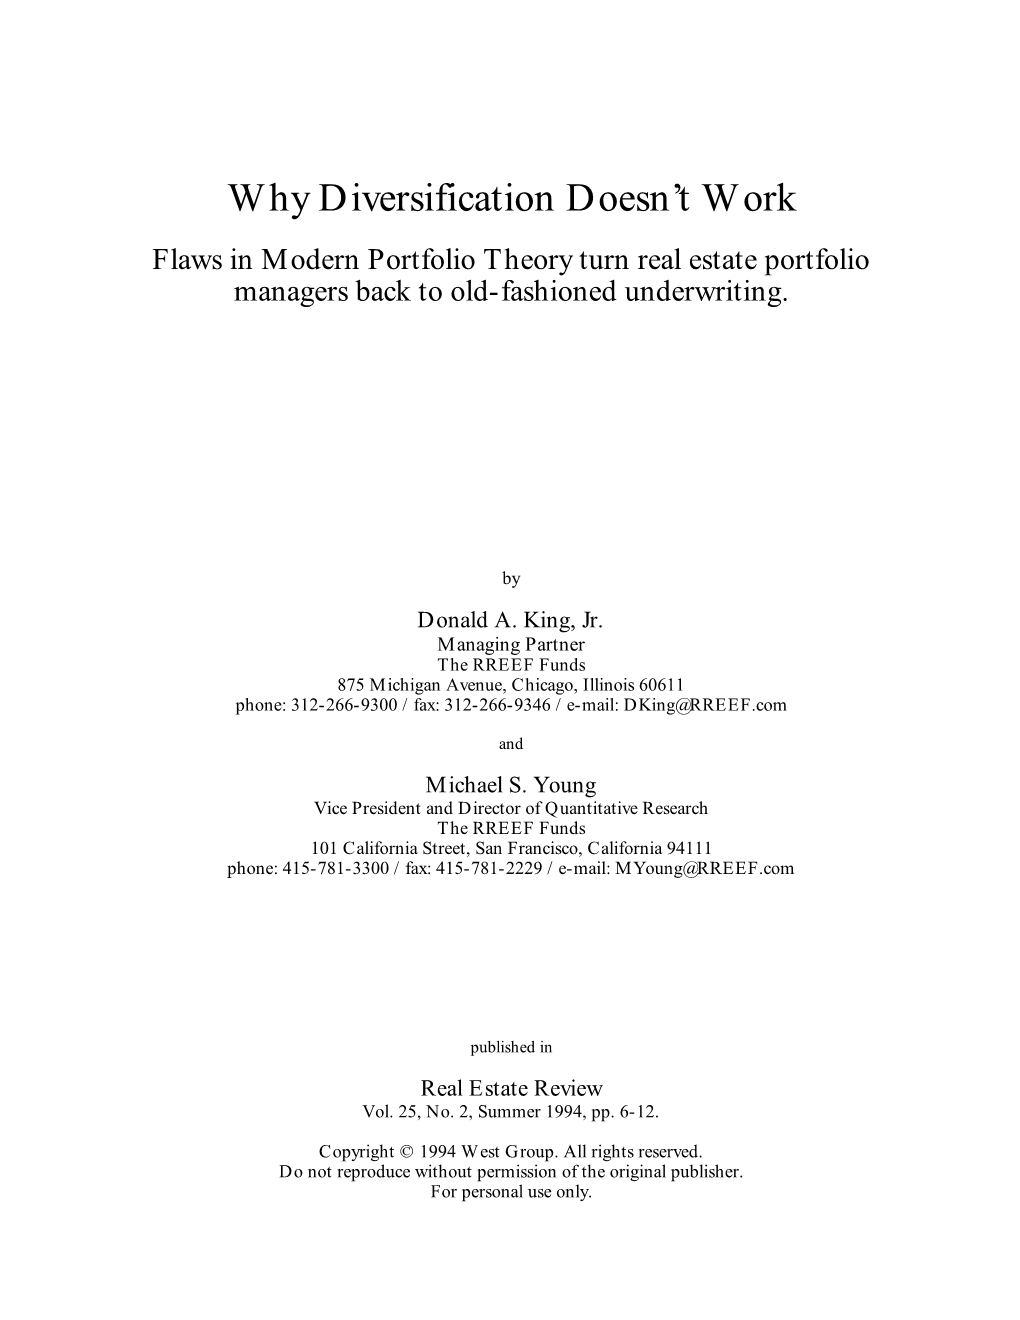 Why Diversification Doesn't Work